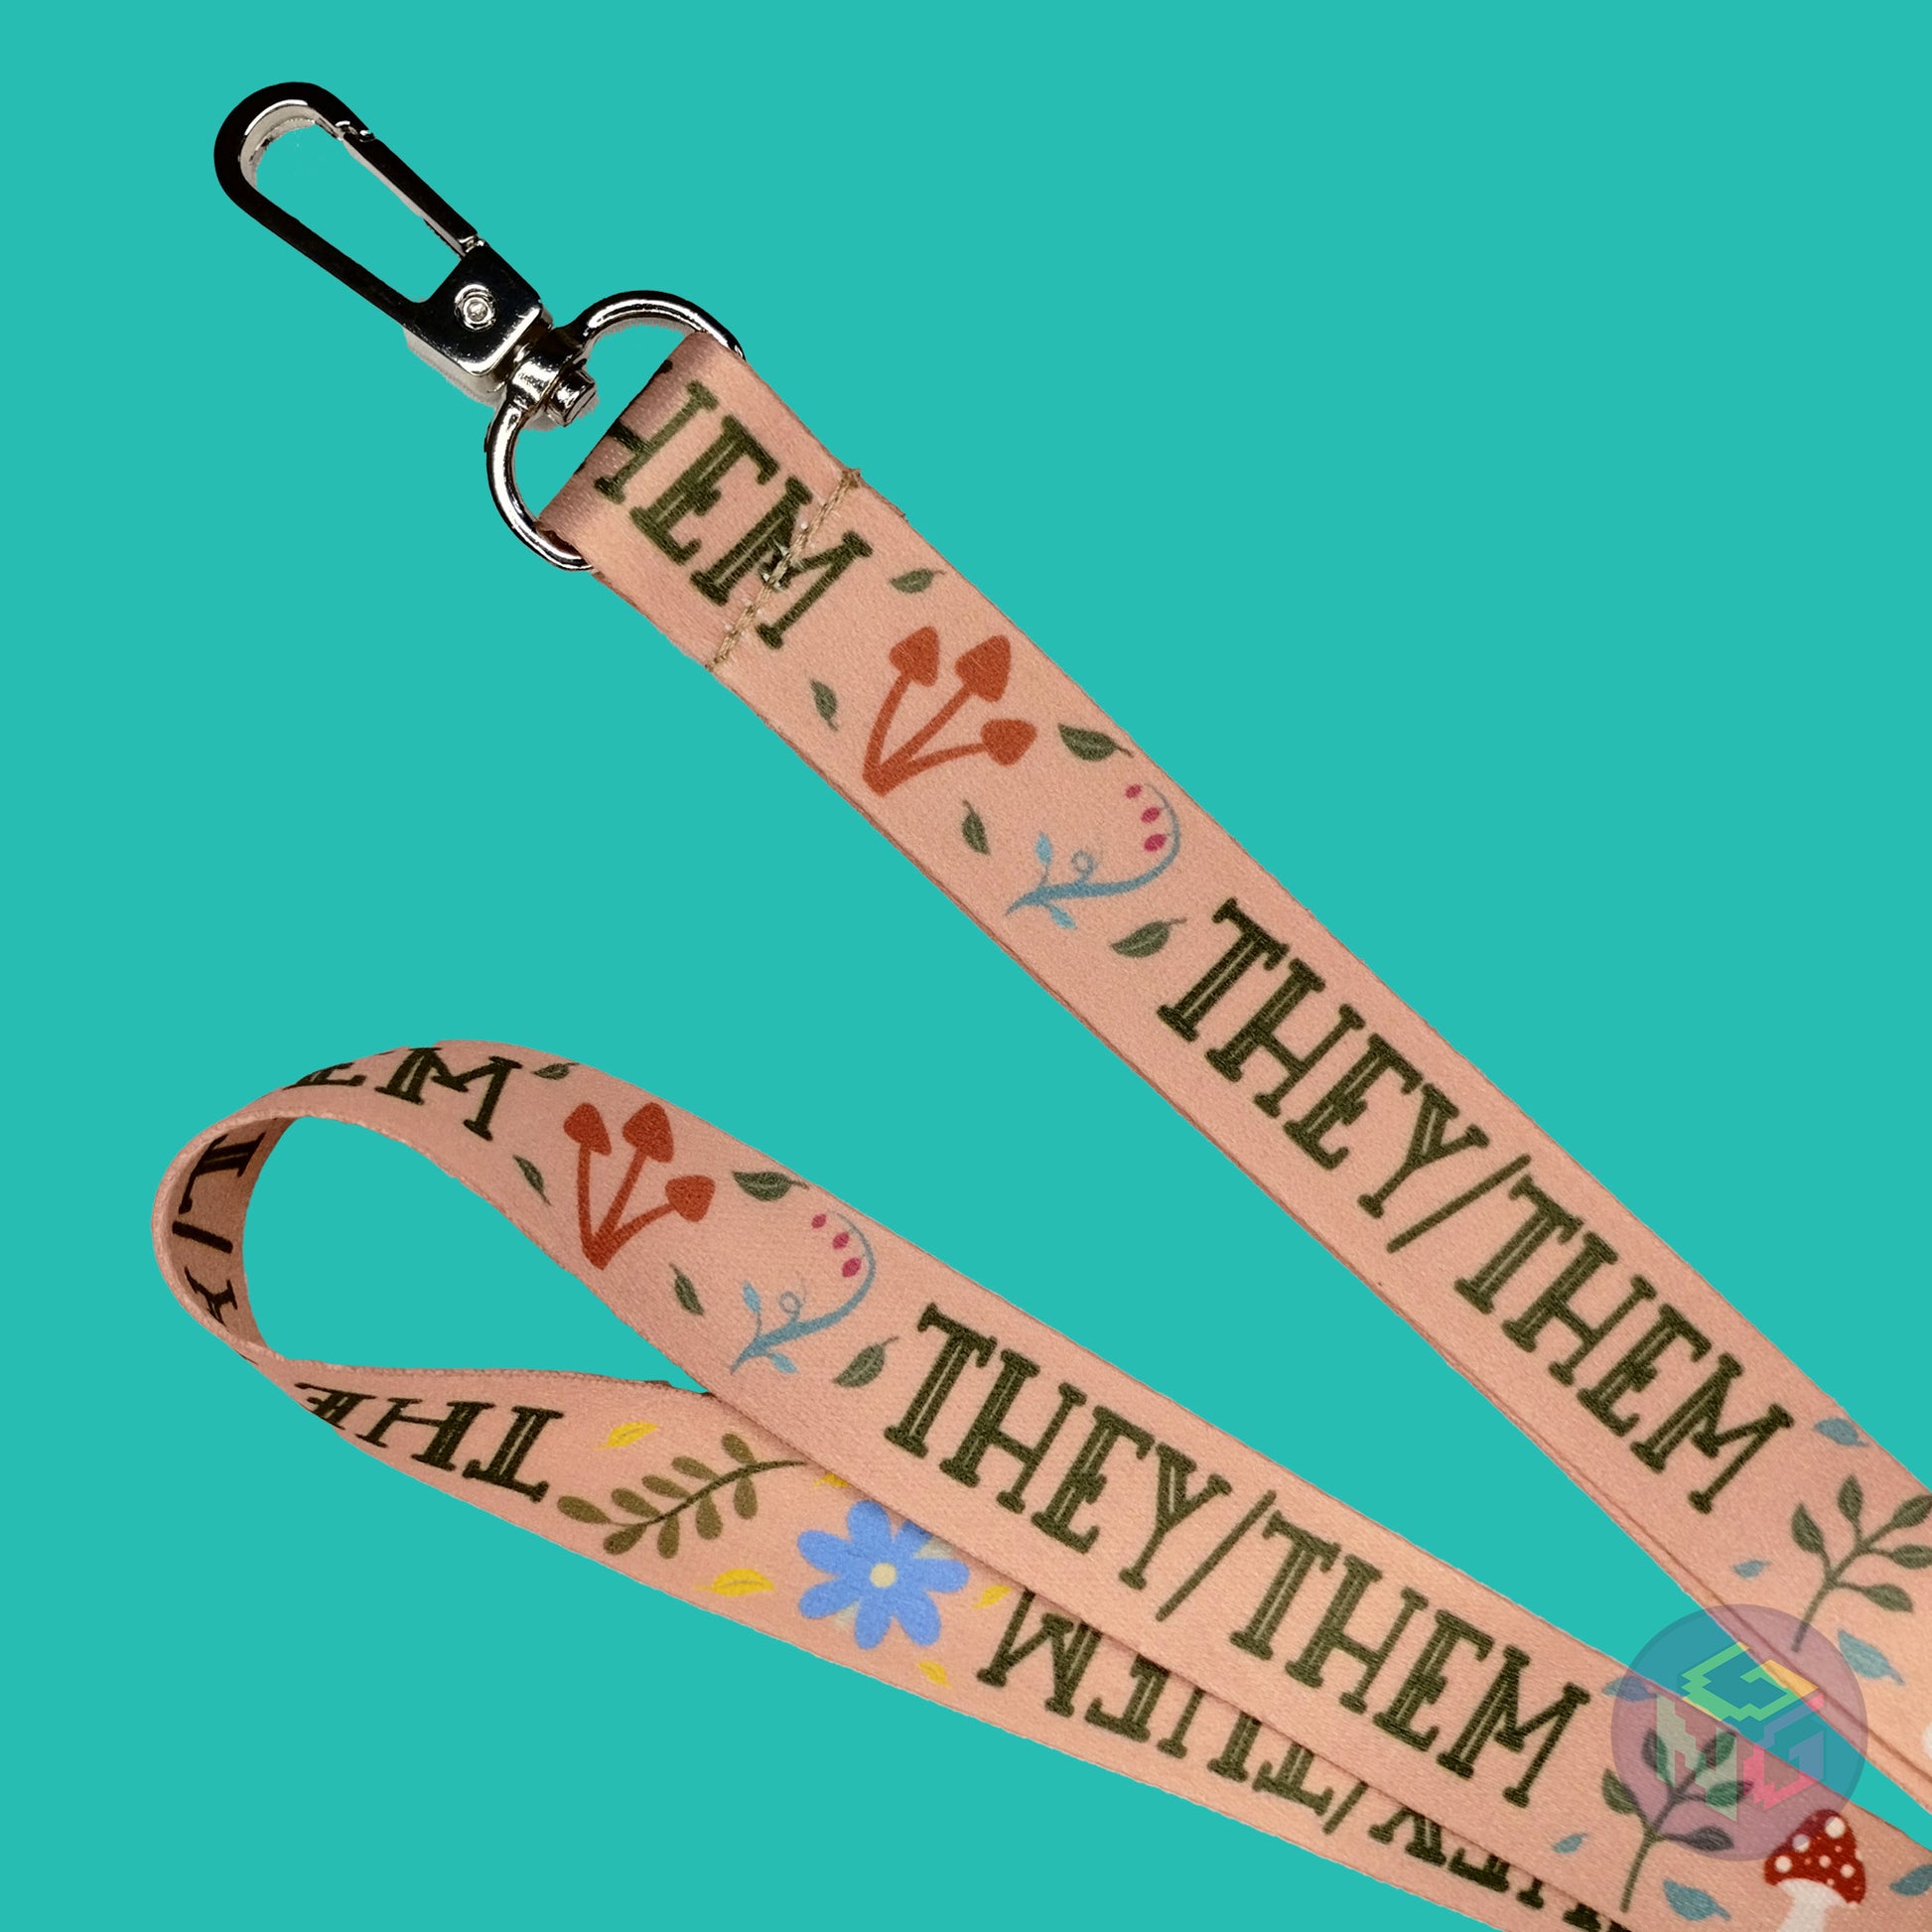 close up detail of the green they them nature lanyard showing the lobster clasp, brown mushrooms, green leaves, and all caps text